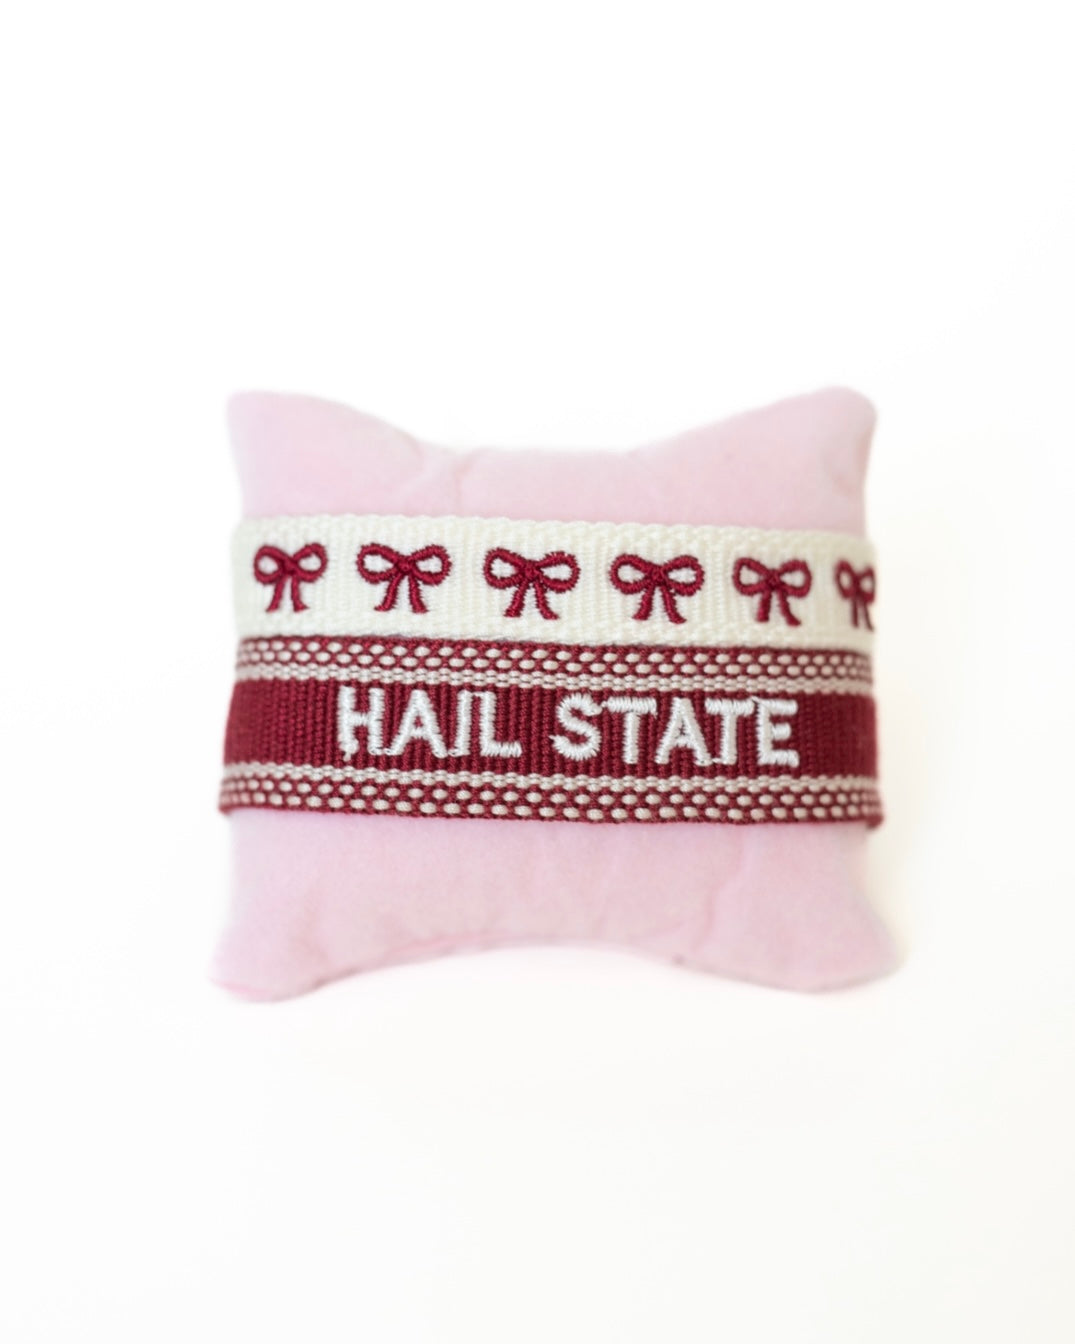 Hail State Bow Stack